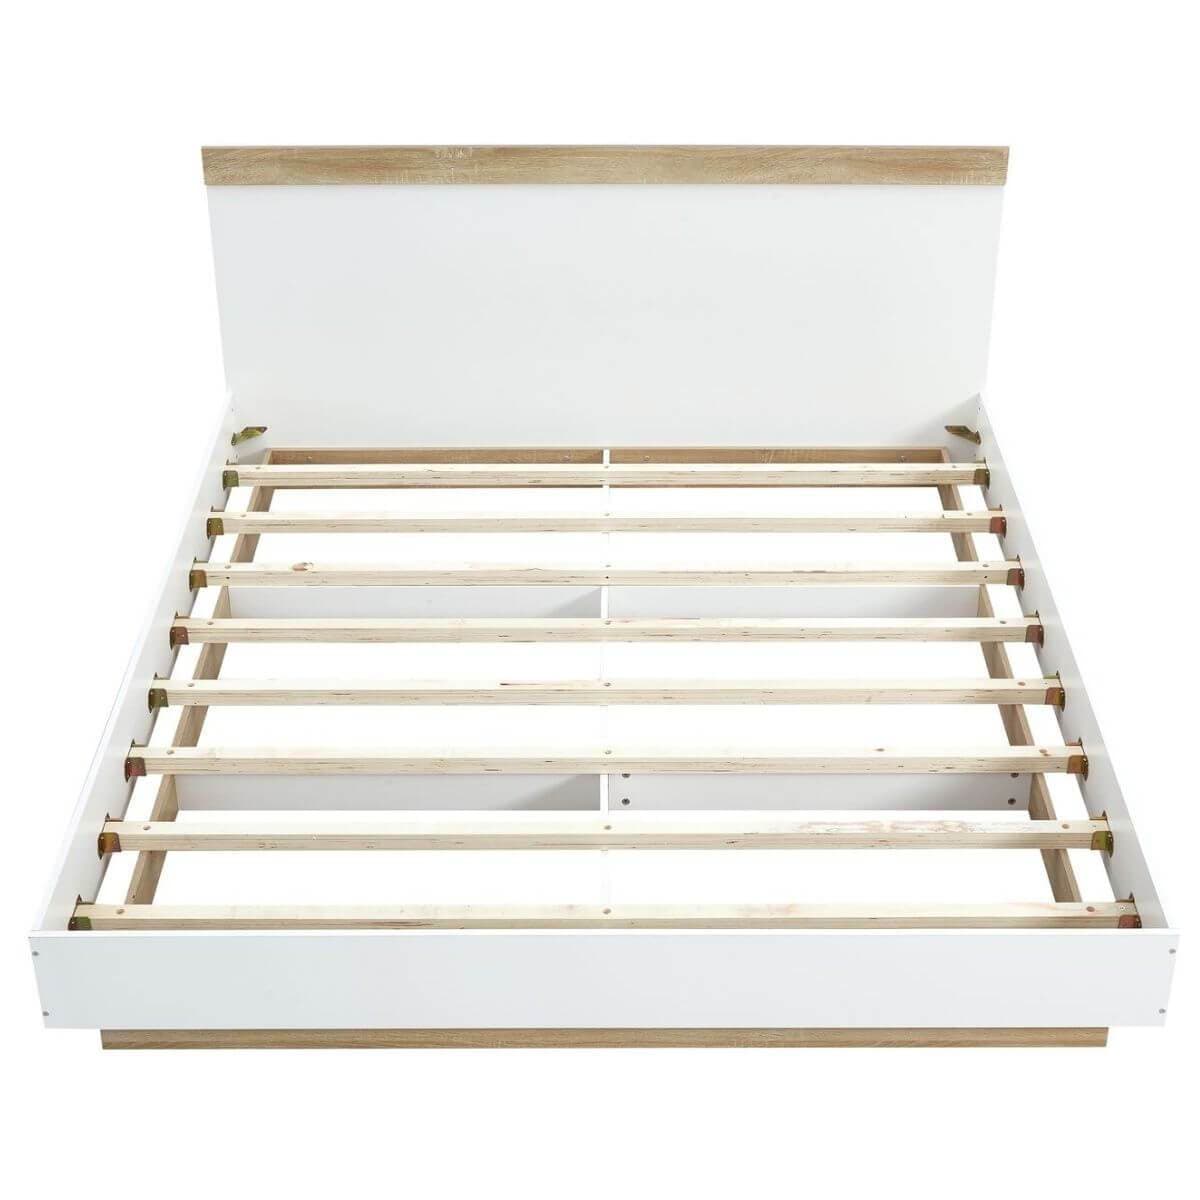 Aiden Industrial Contemporary White Oak Bed Frame King Size - Newstart Furniture